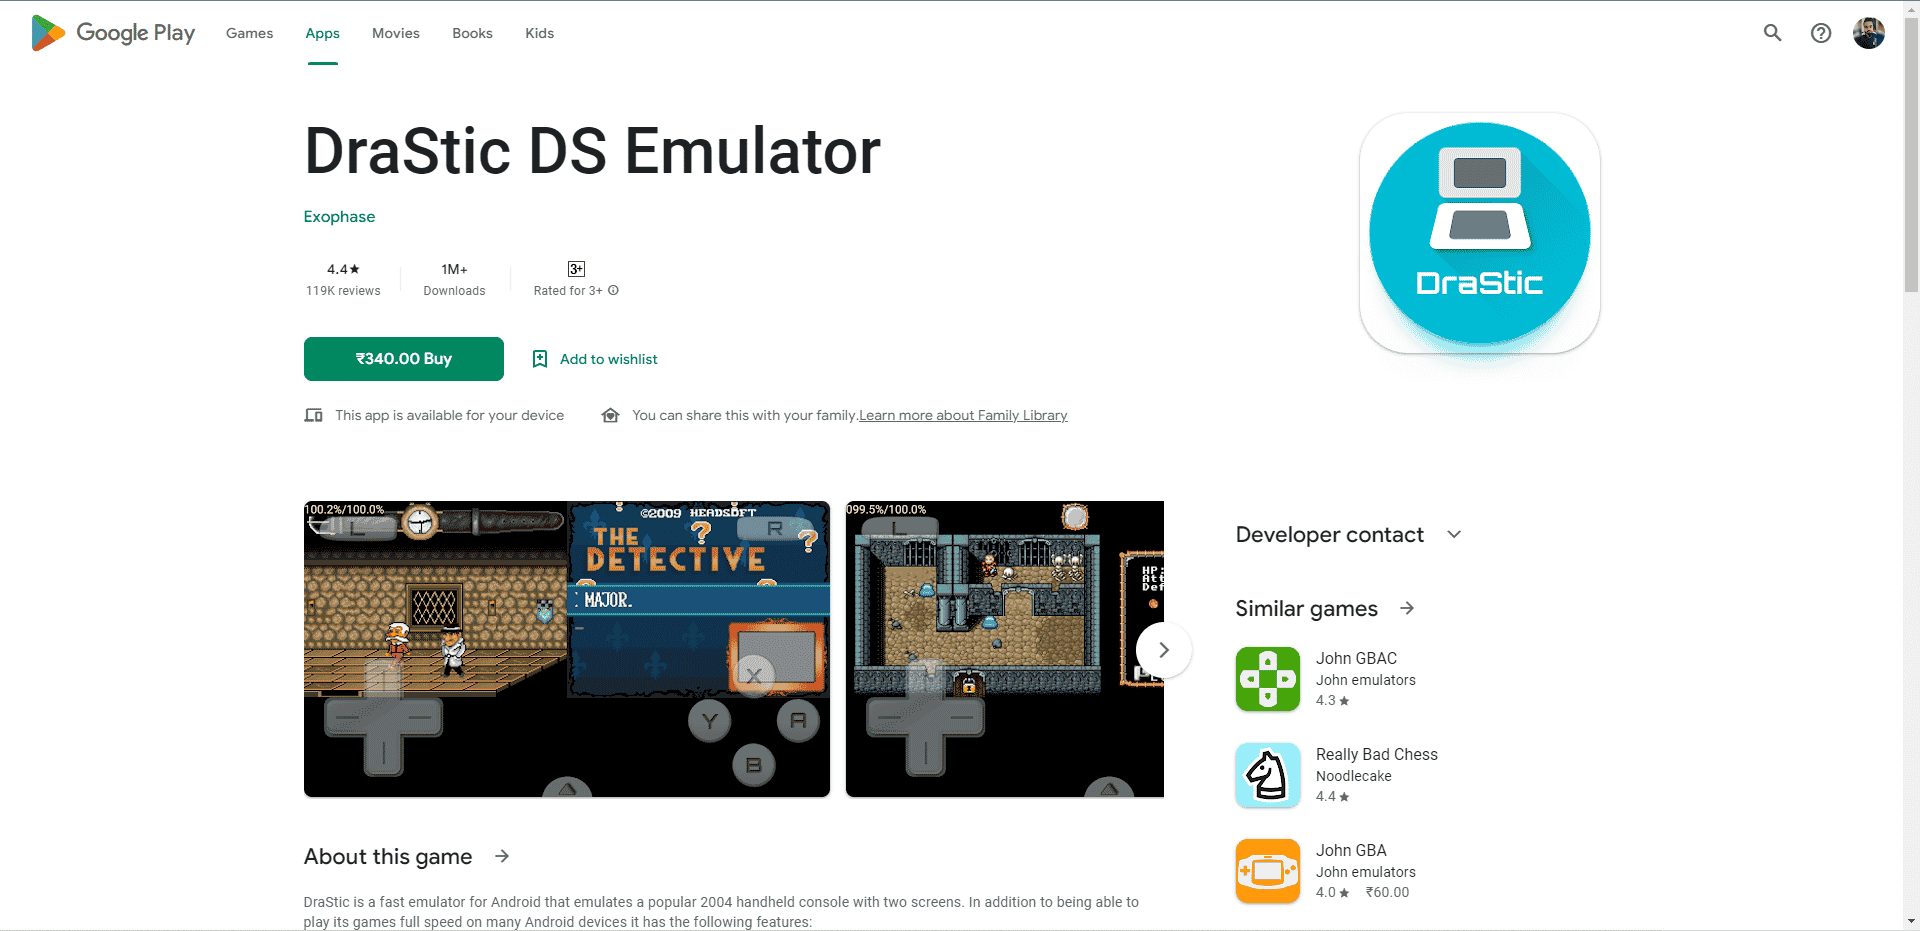 DraStic DS emulator play store webpage